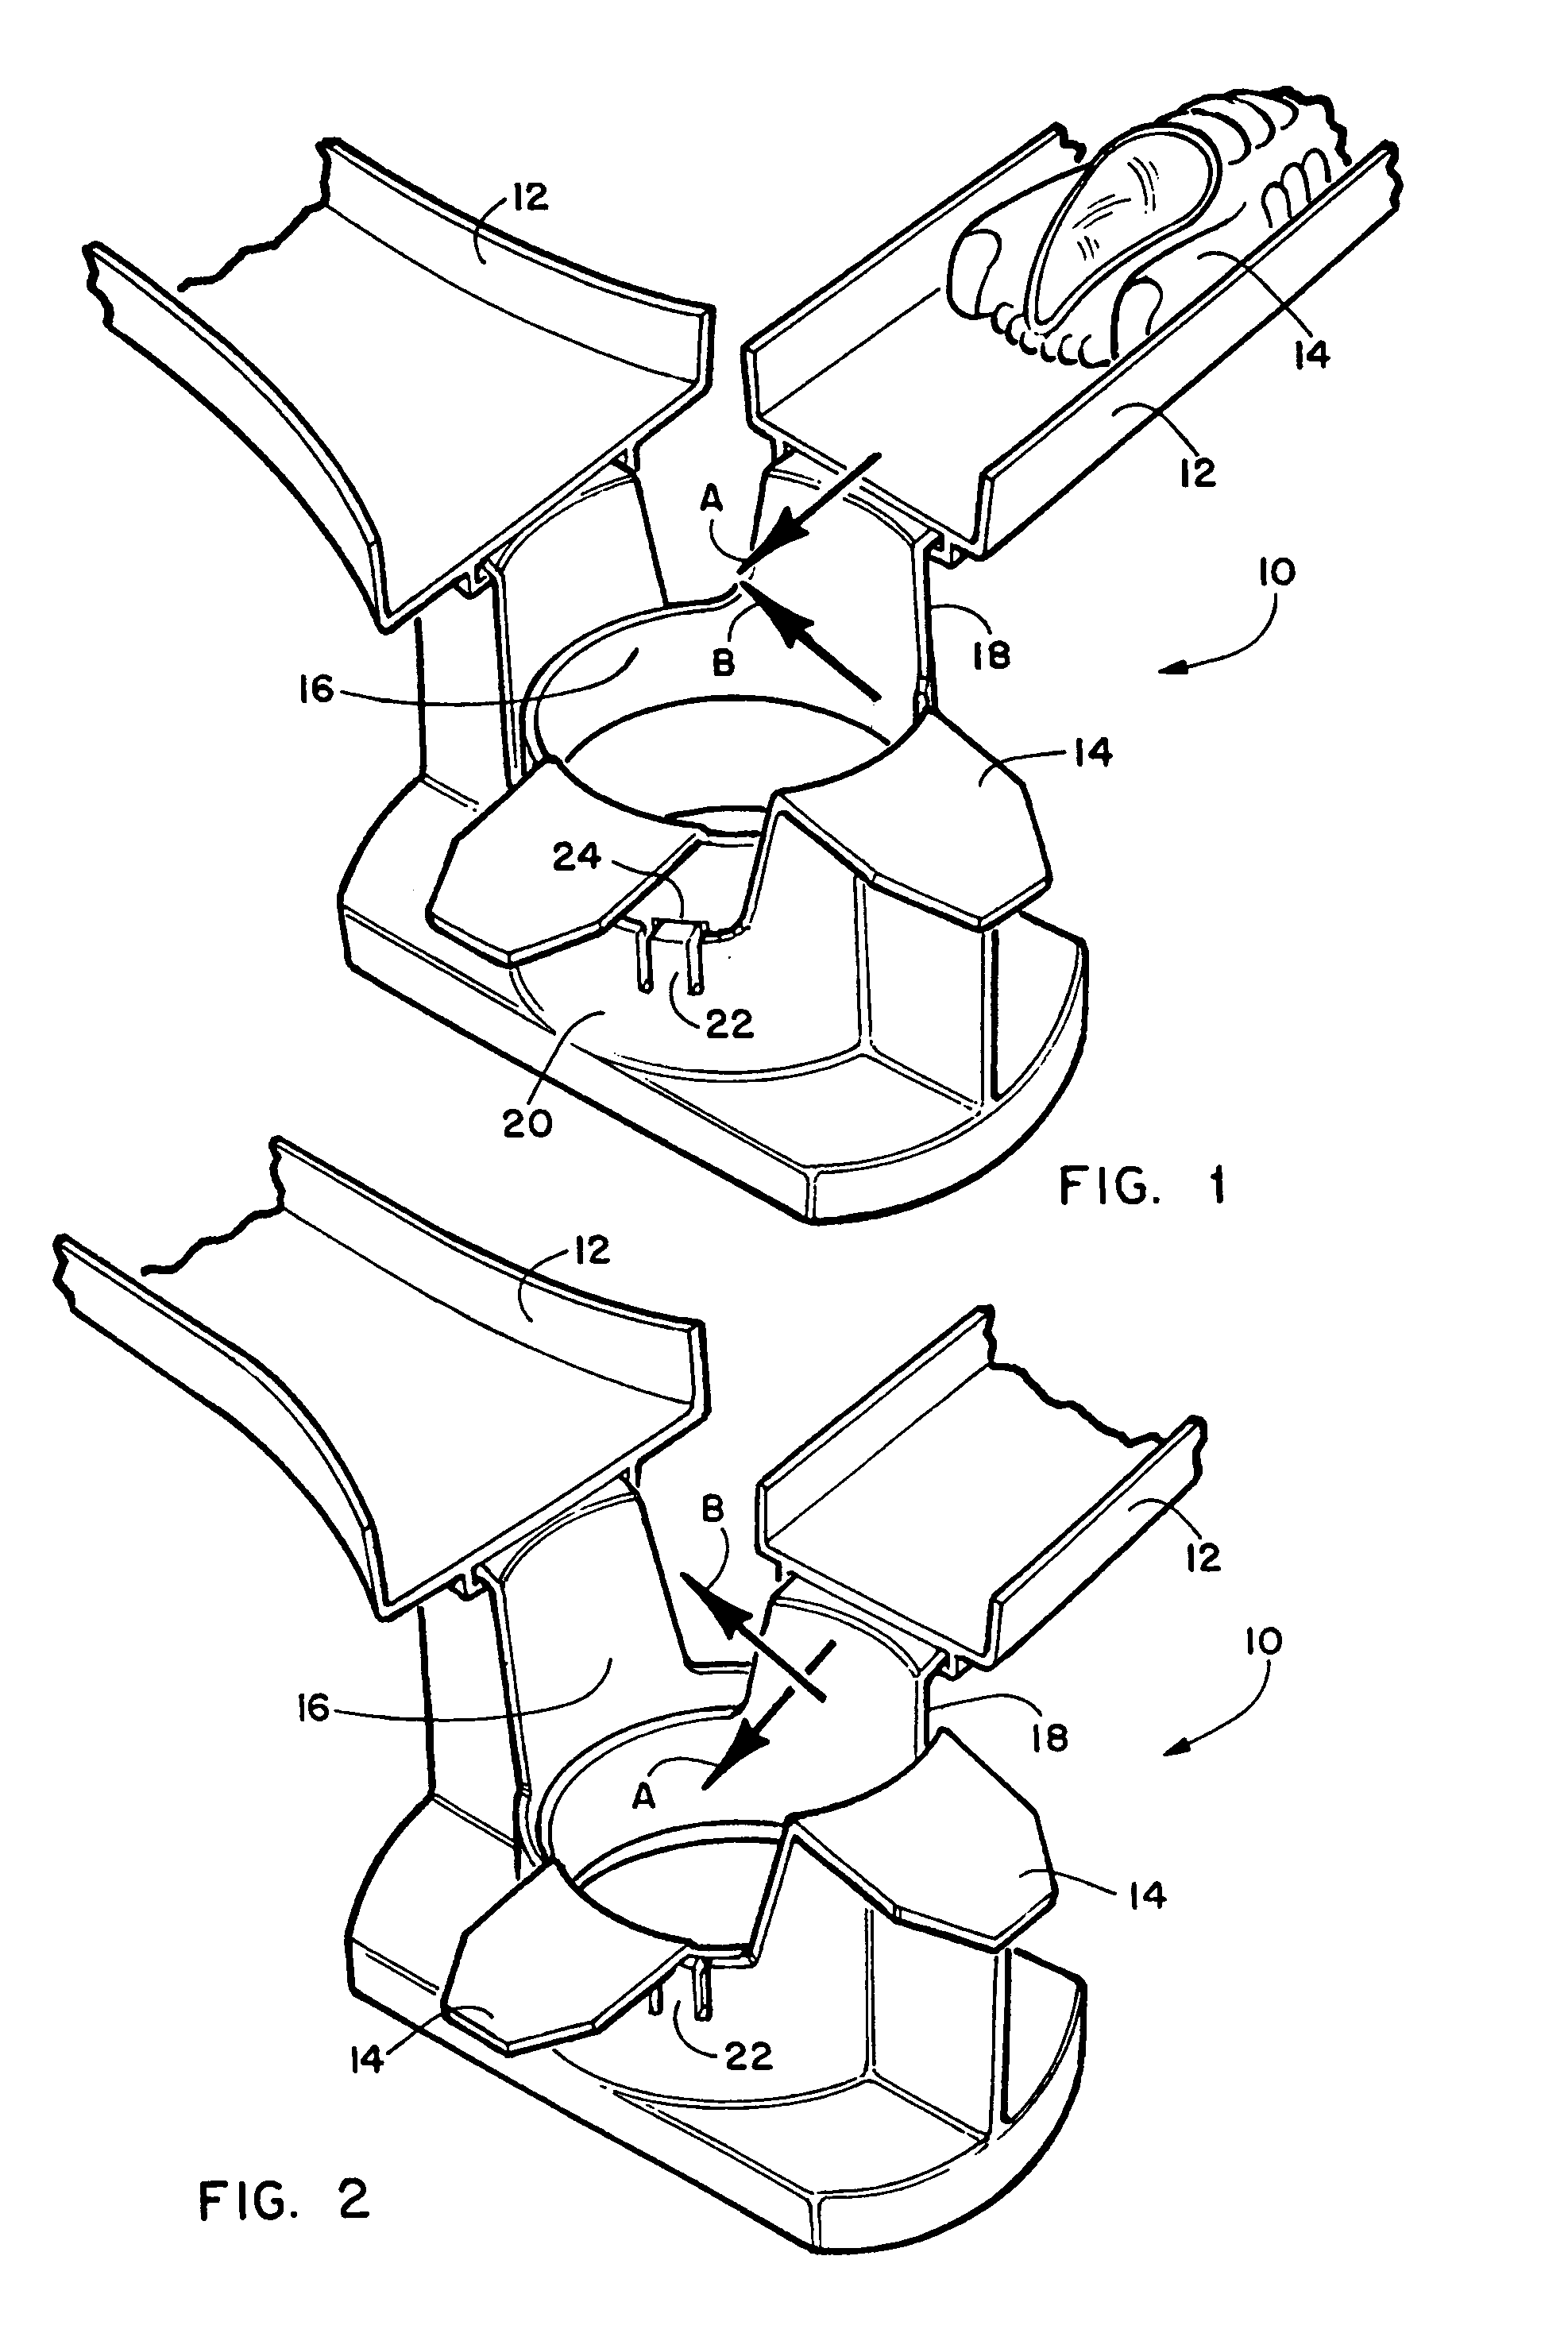 Toy vehicle intersection with elevational adjustment